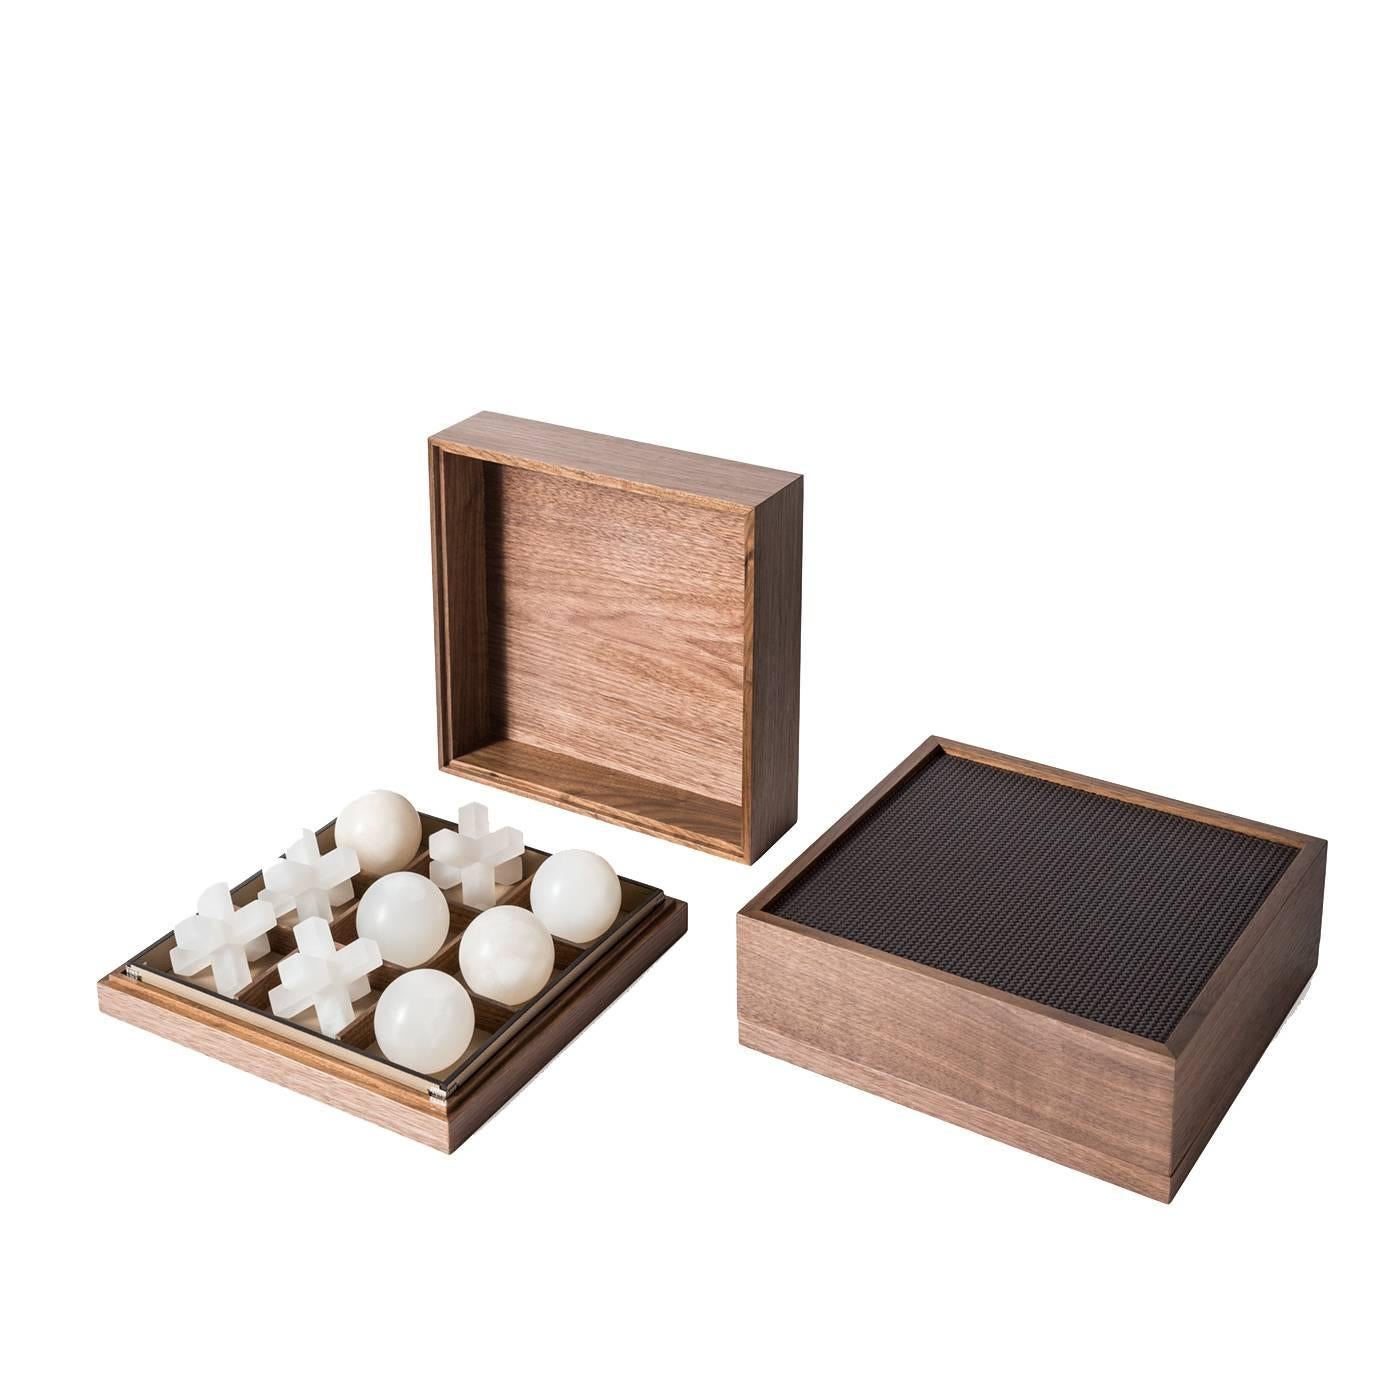 Traditional craftsmanship and noble materials make this game box the ultimate sophisticated accessory. A perfect gift and a precious addition to any home, this box is made of wood with the top of the lid upholstered in leather. The alabaster noughts